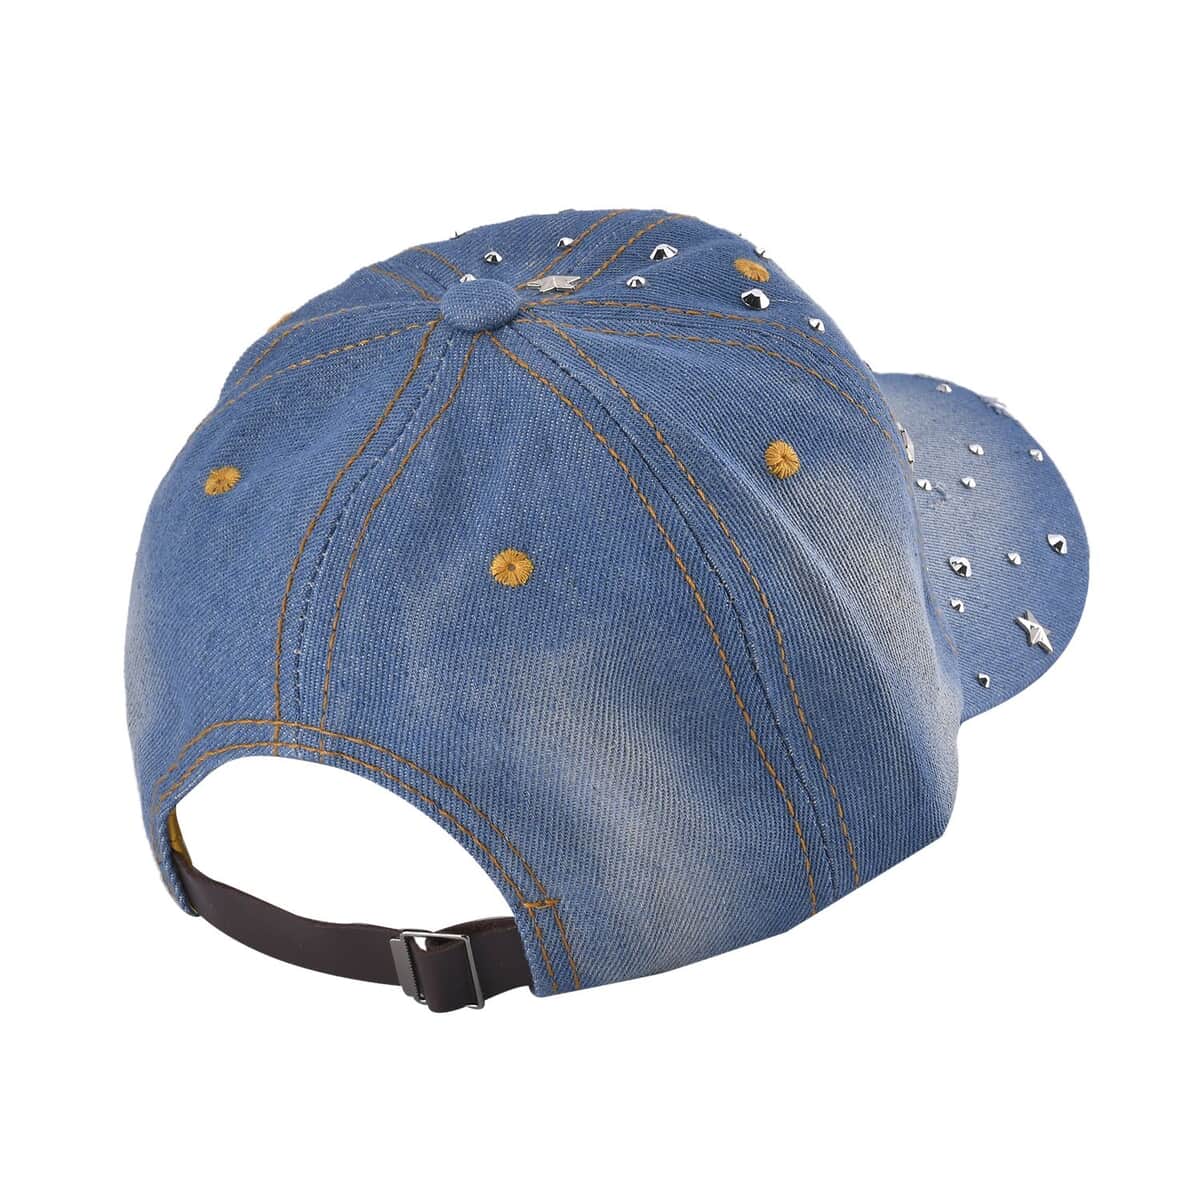 Shining Crystal and Unique Design Cap with Velcro Fasteners (Adjustable Strap) - Blue image number 2